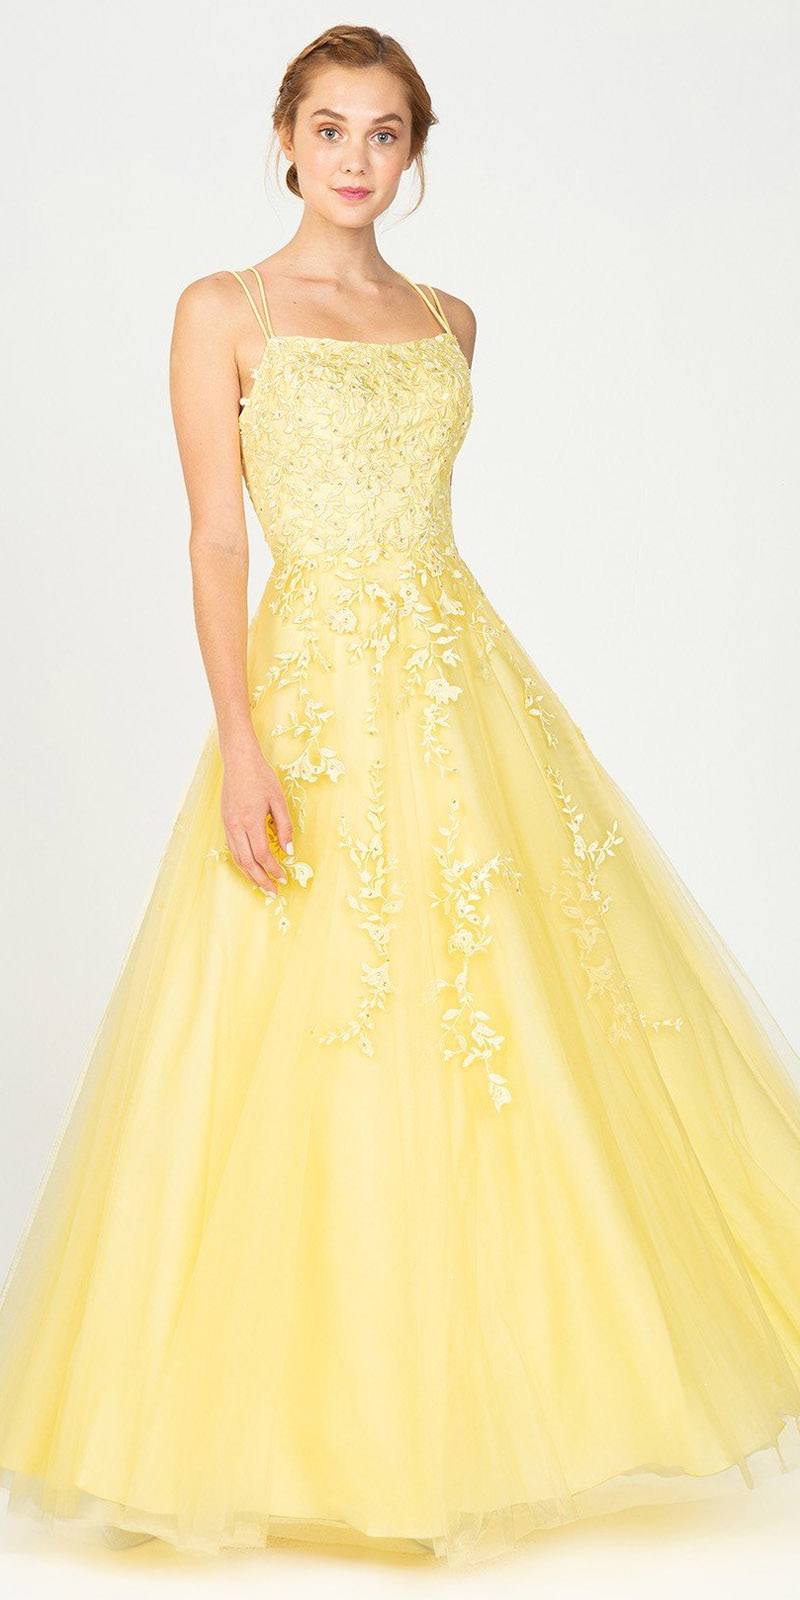 Eureka Fashion 9757 Appliqued Yellow Prom Ball Gown Lace-Up Back